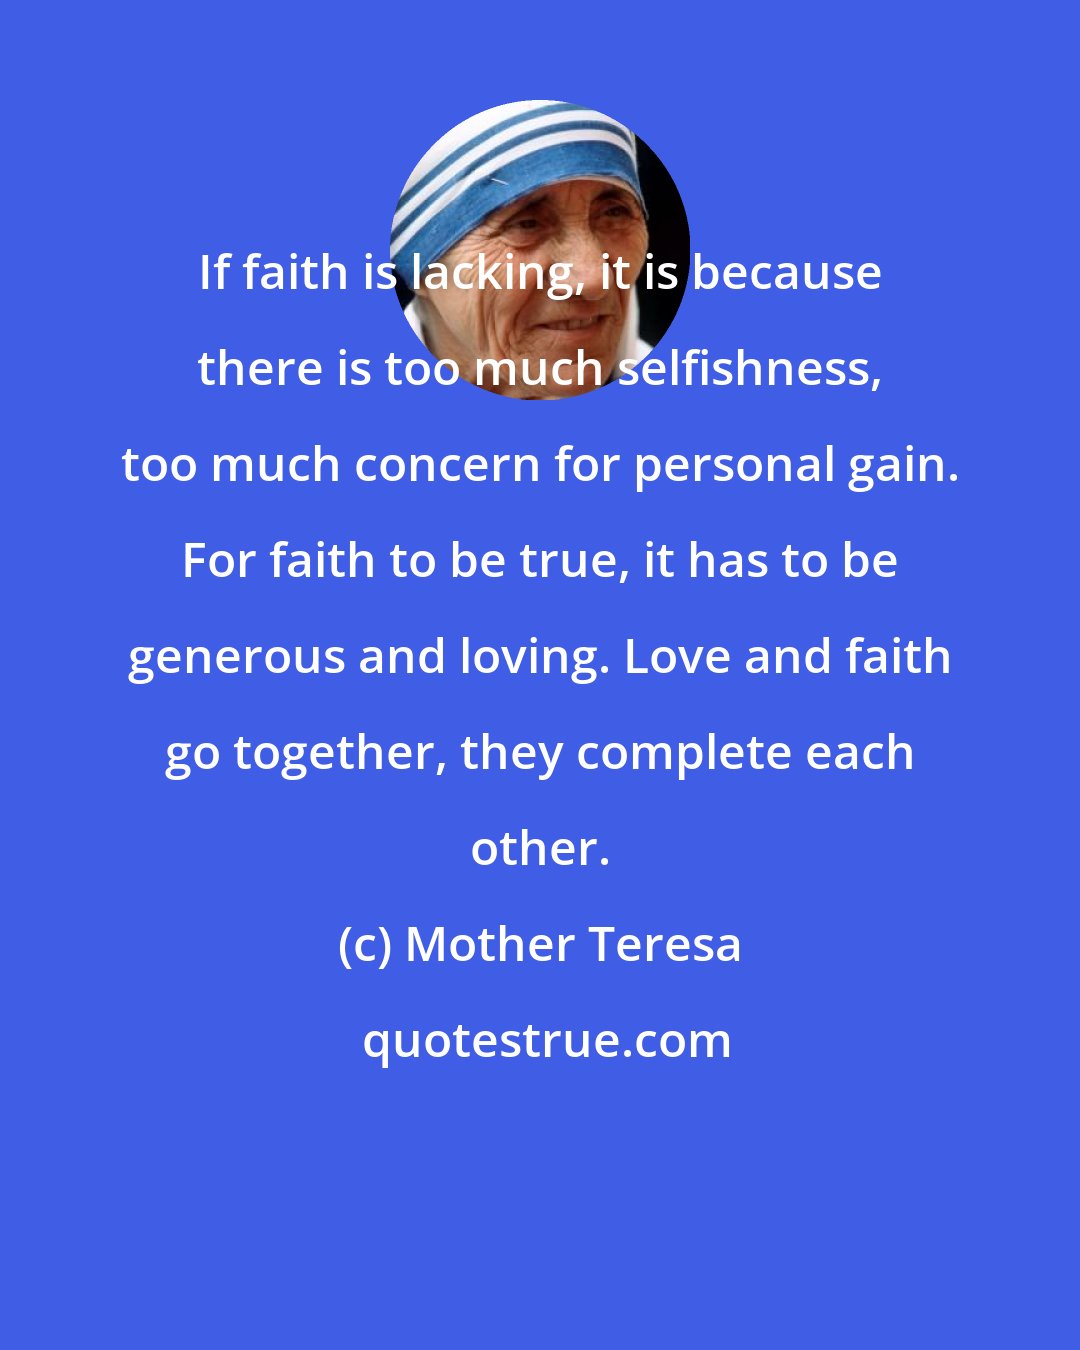 Mother Teresa: If faith is lacking, it is because there is too much selfishness, too much concern for personal gain. For faith to be true, it has to be generous and loving. Love and faith go together, they complete each other.